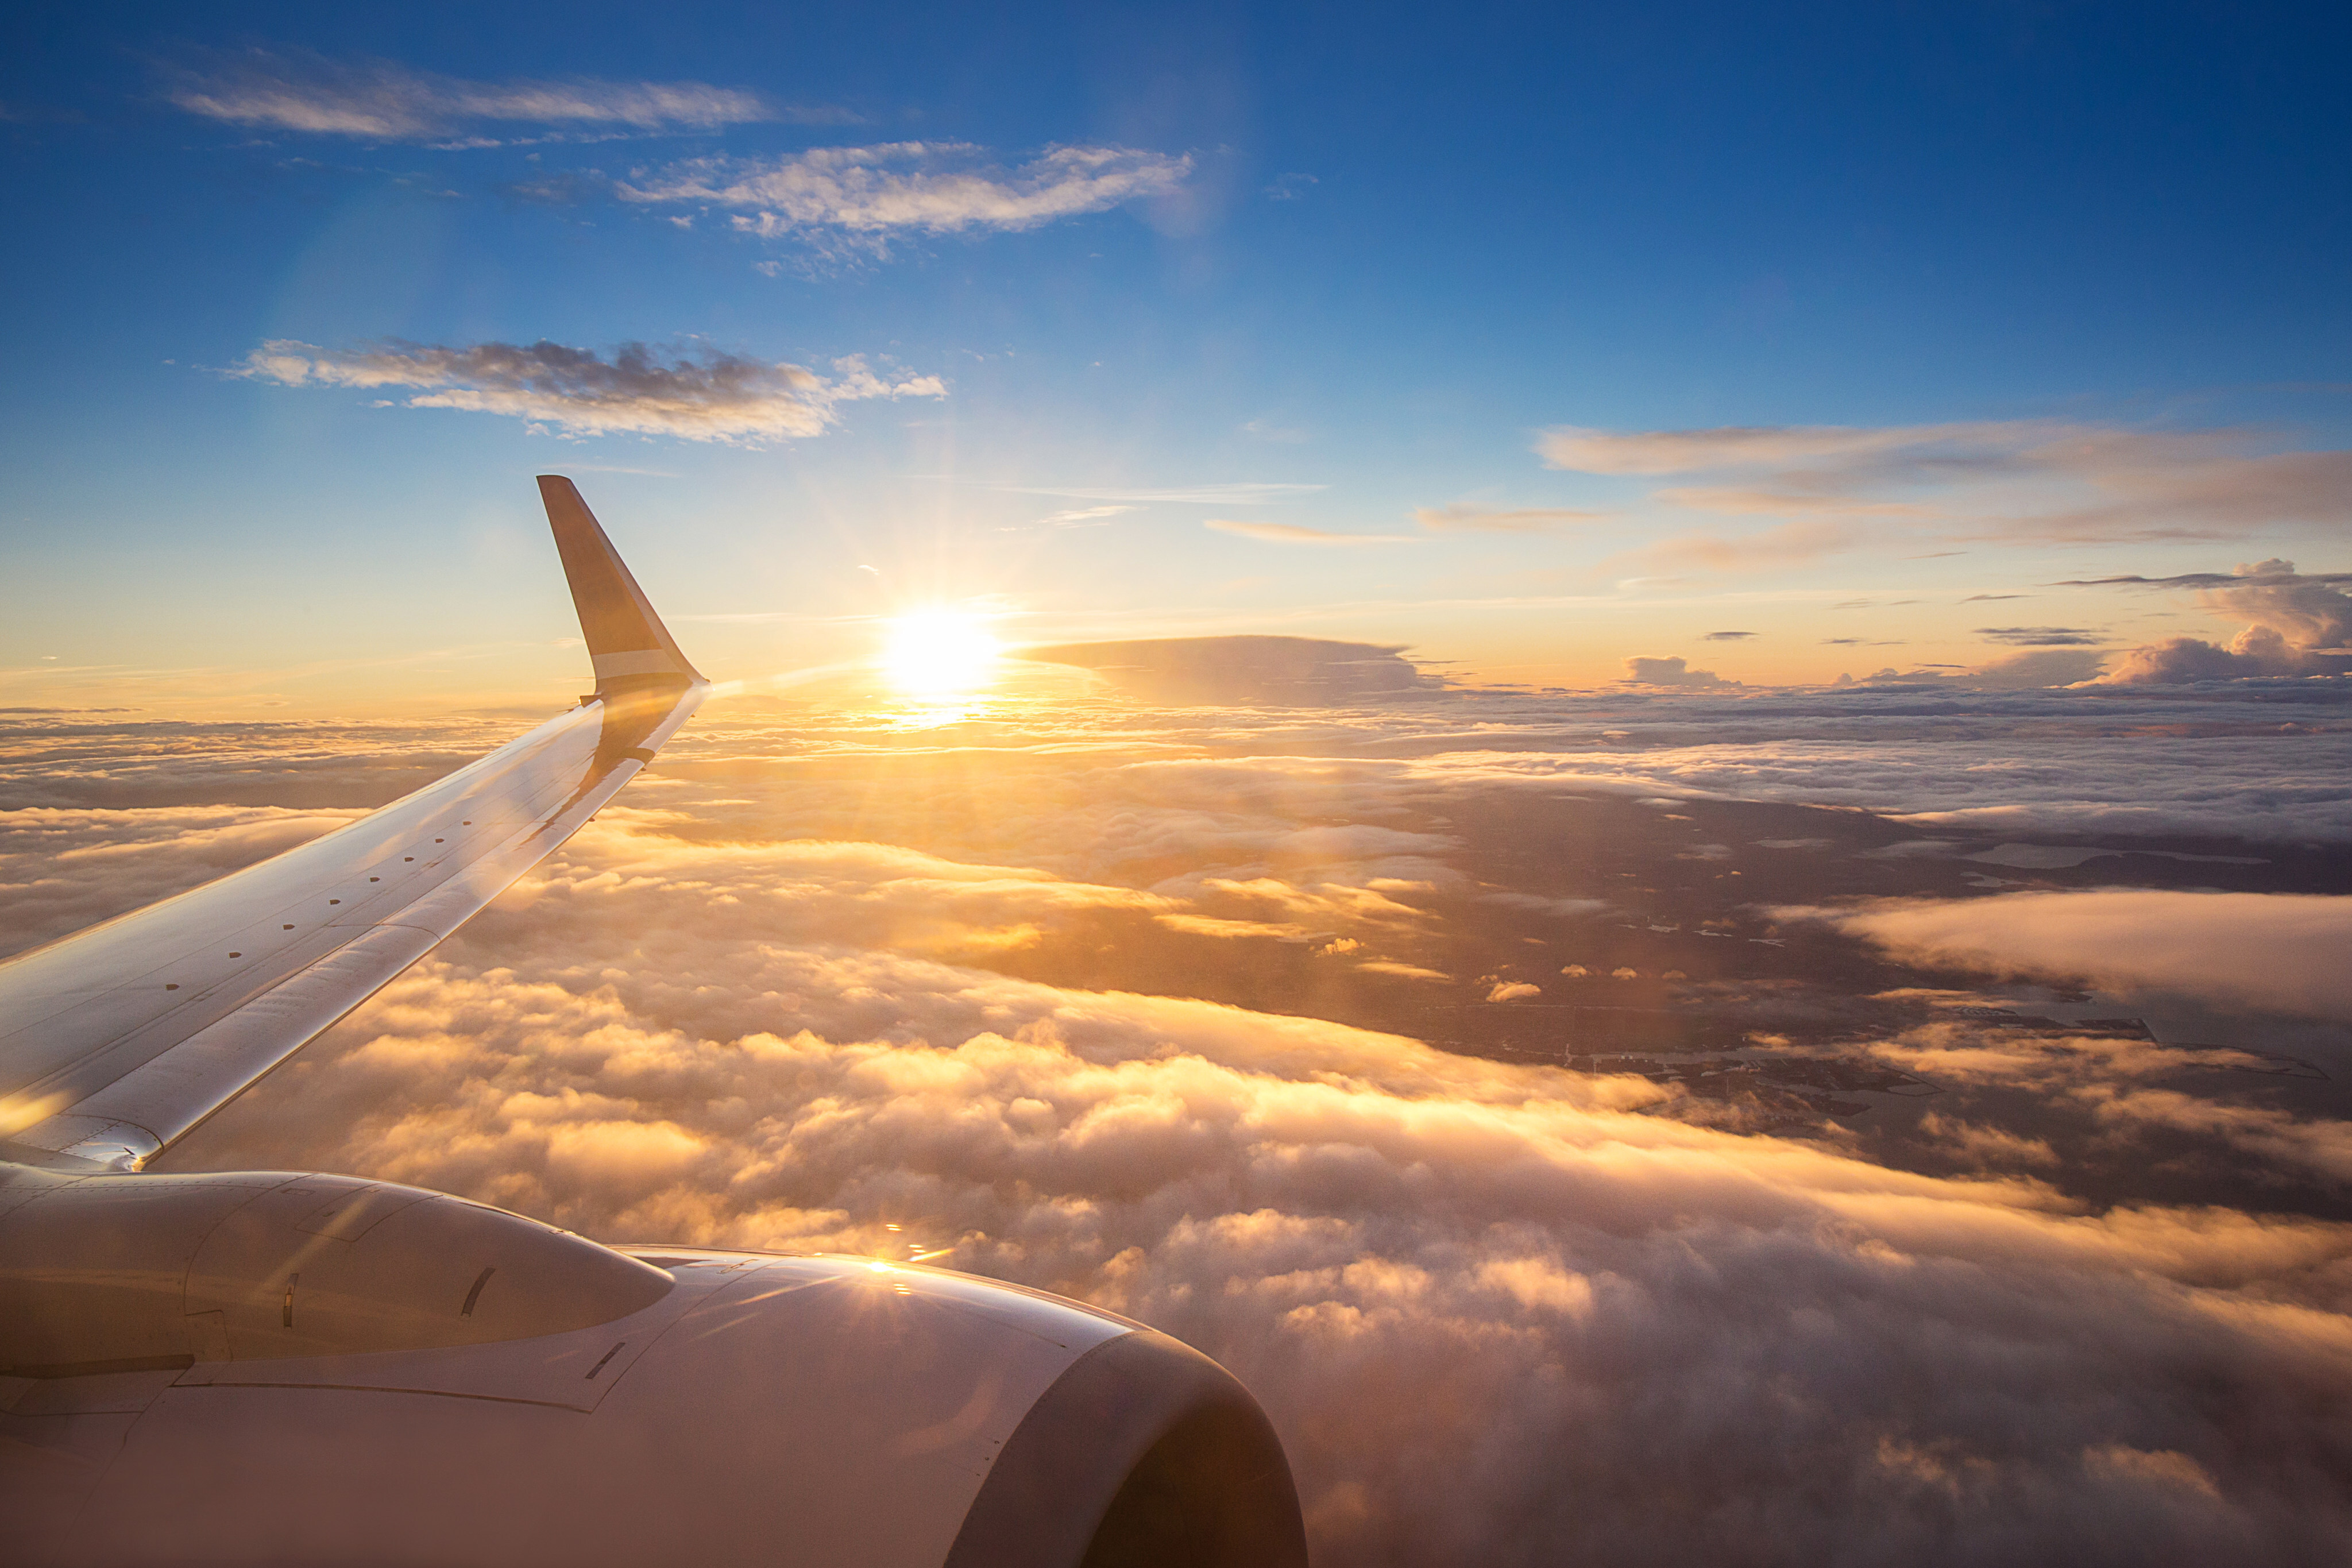 Remember this? Air travel will eventually return, but are we ready to pay more for it to be more environmentally responsible? Photo: Getty Images